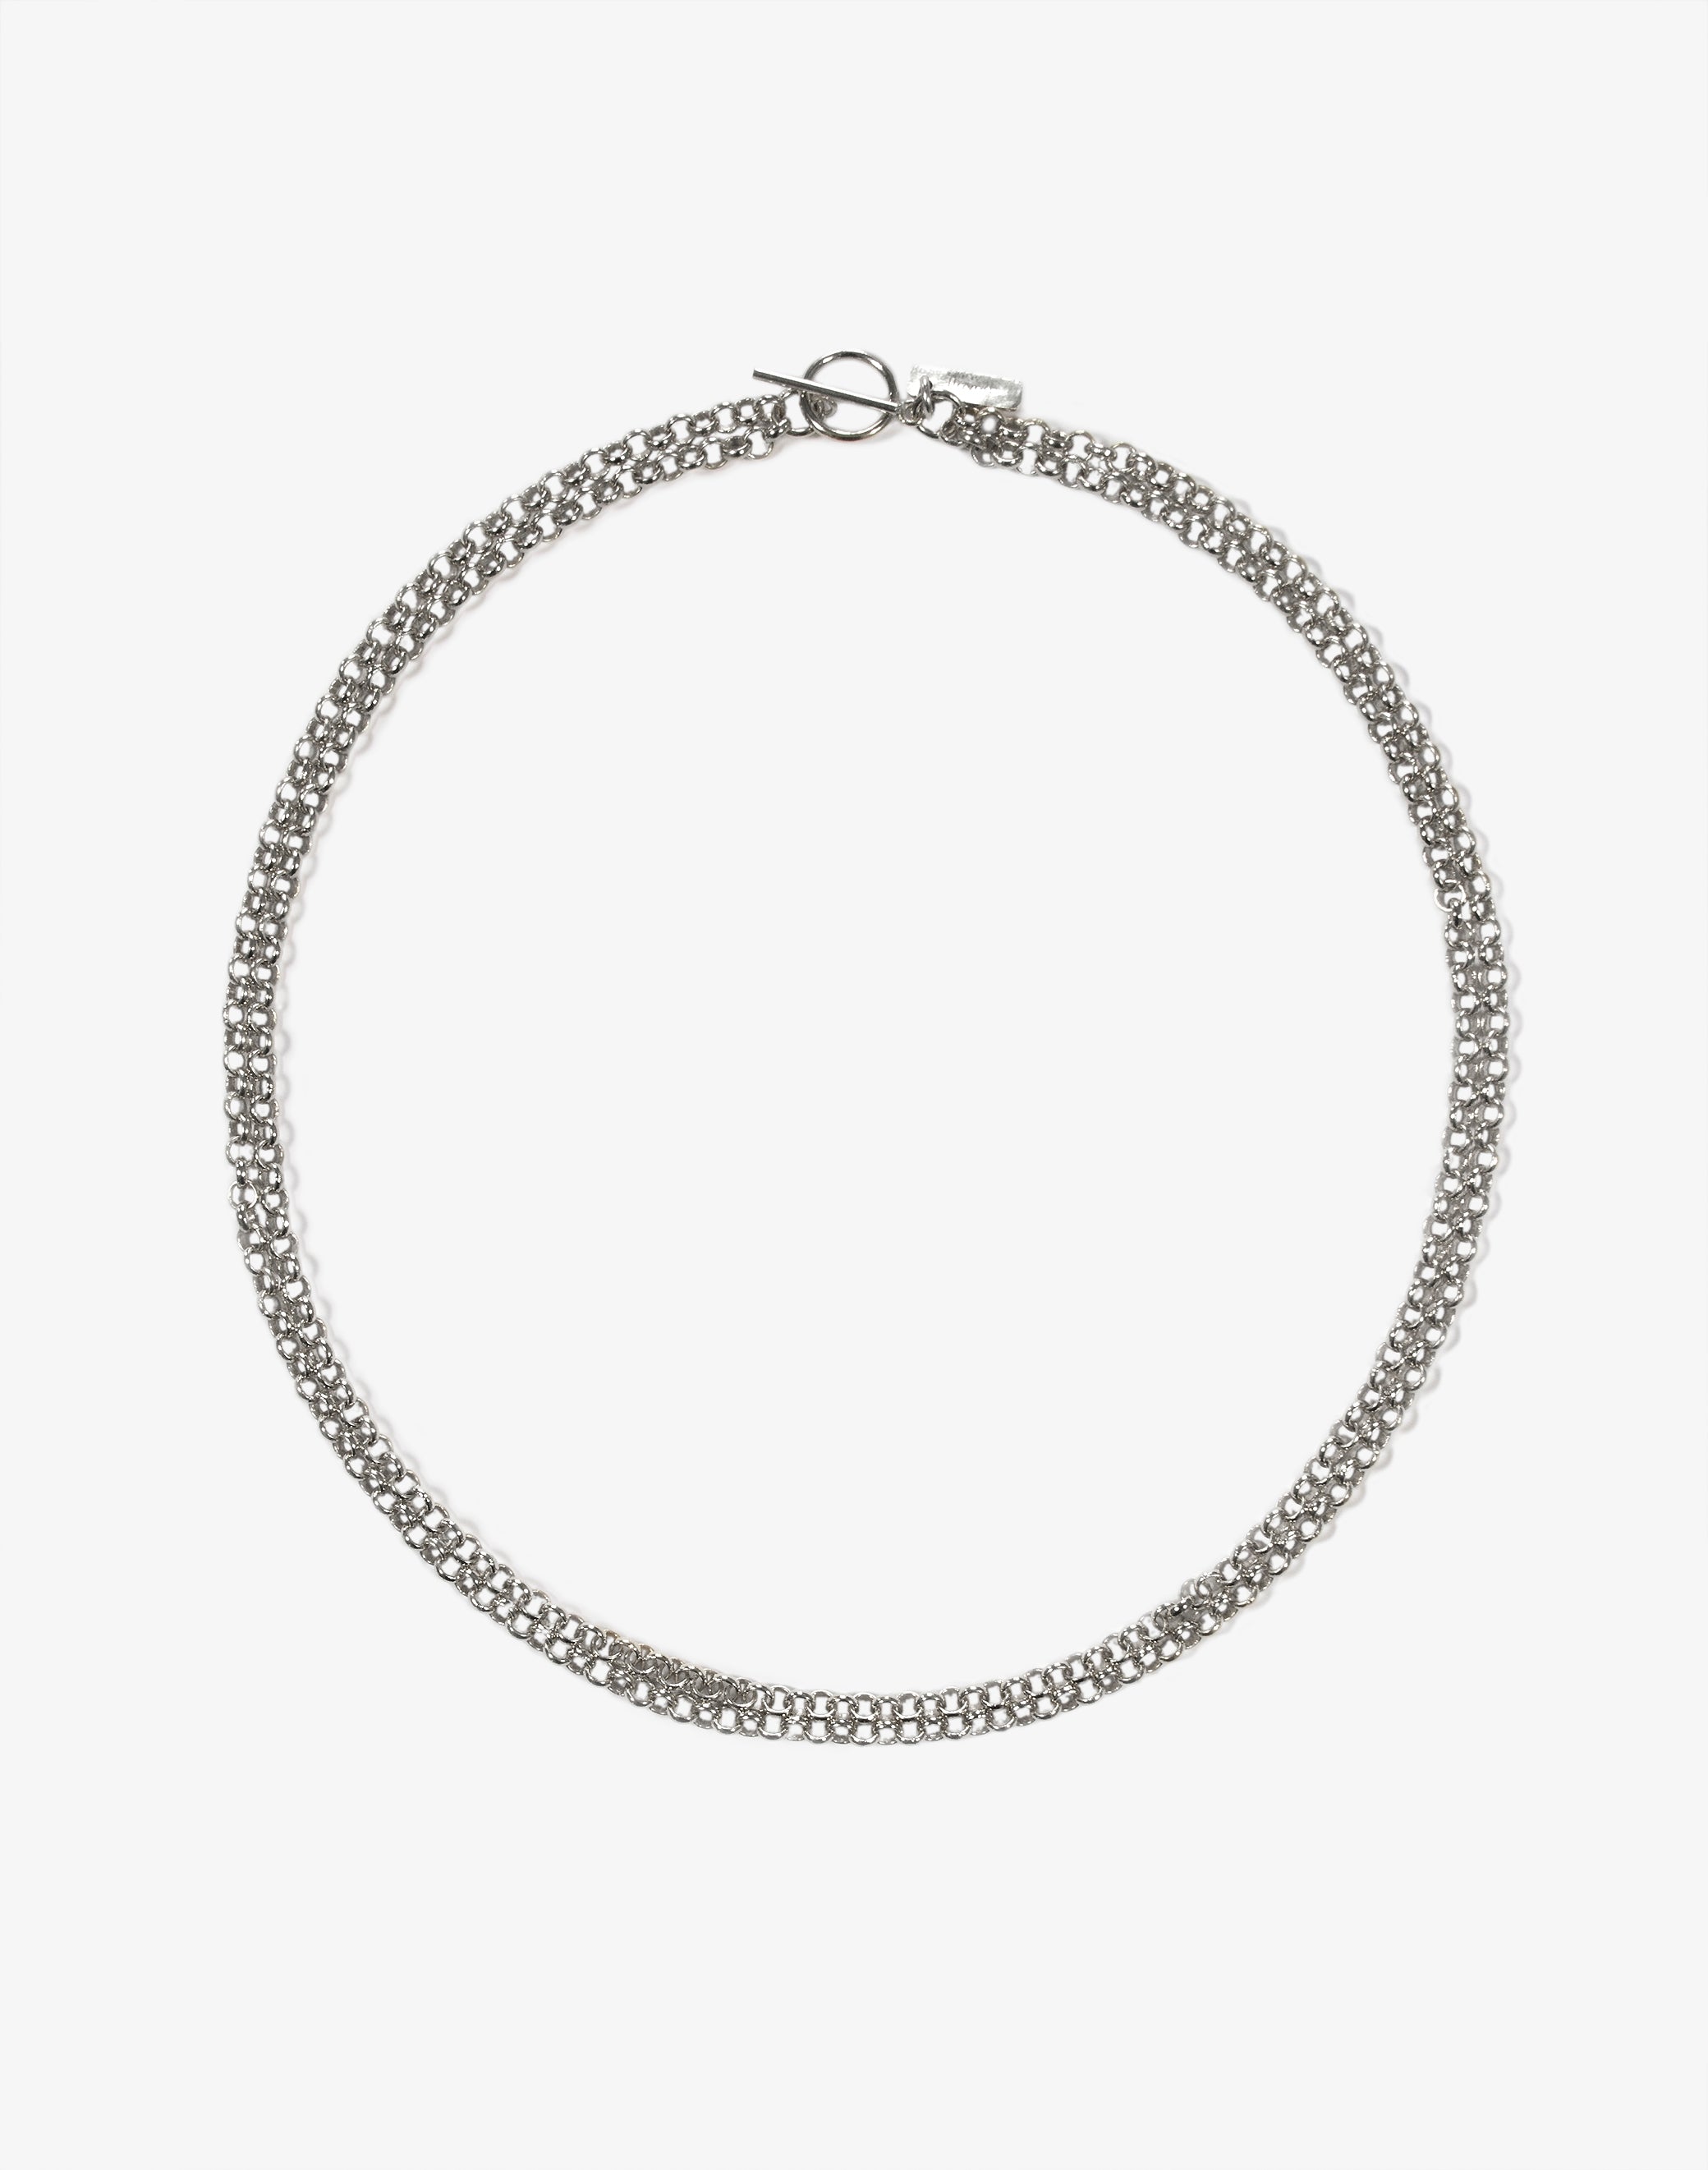 Women unisex silver double chain chic cnecklace - Made In Brookyn New York 1